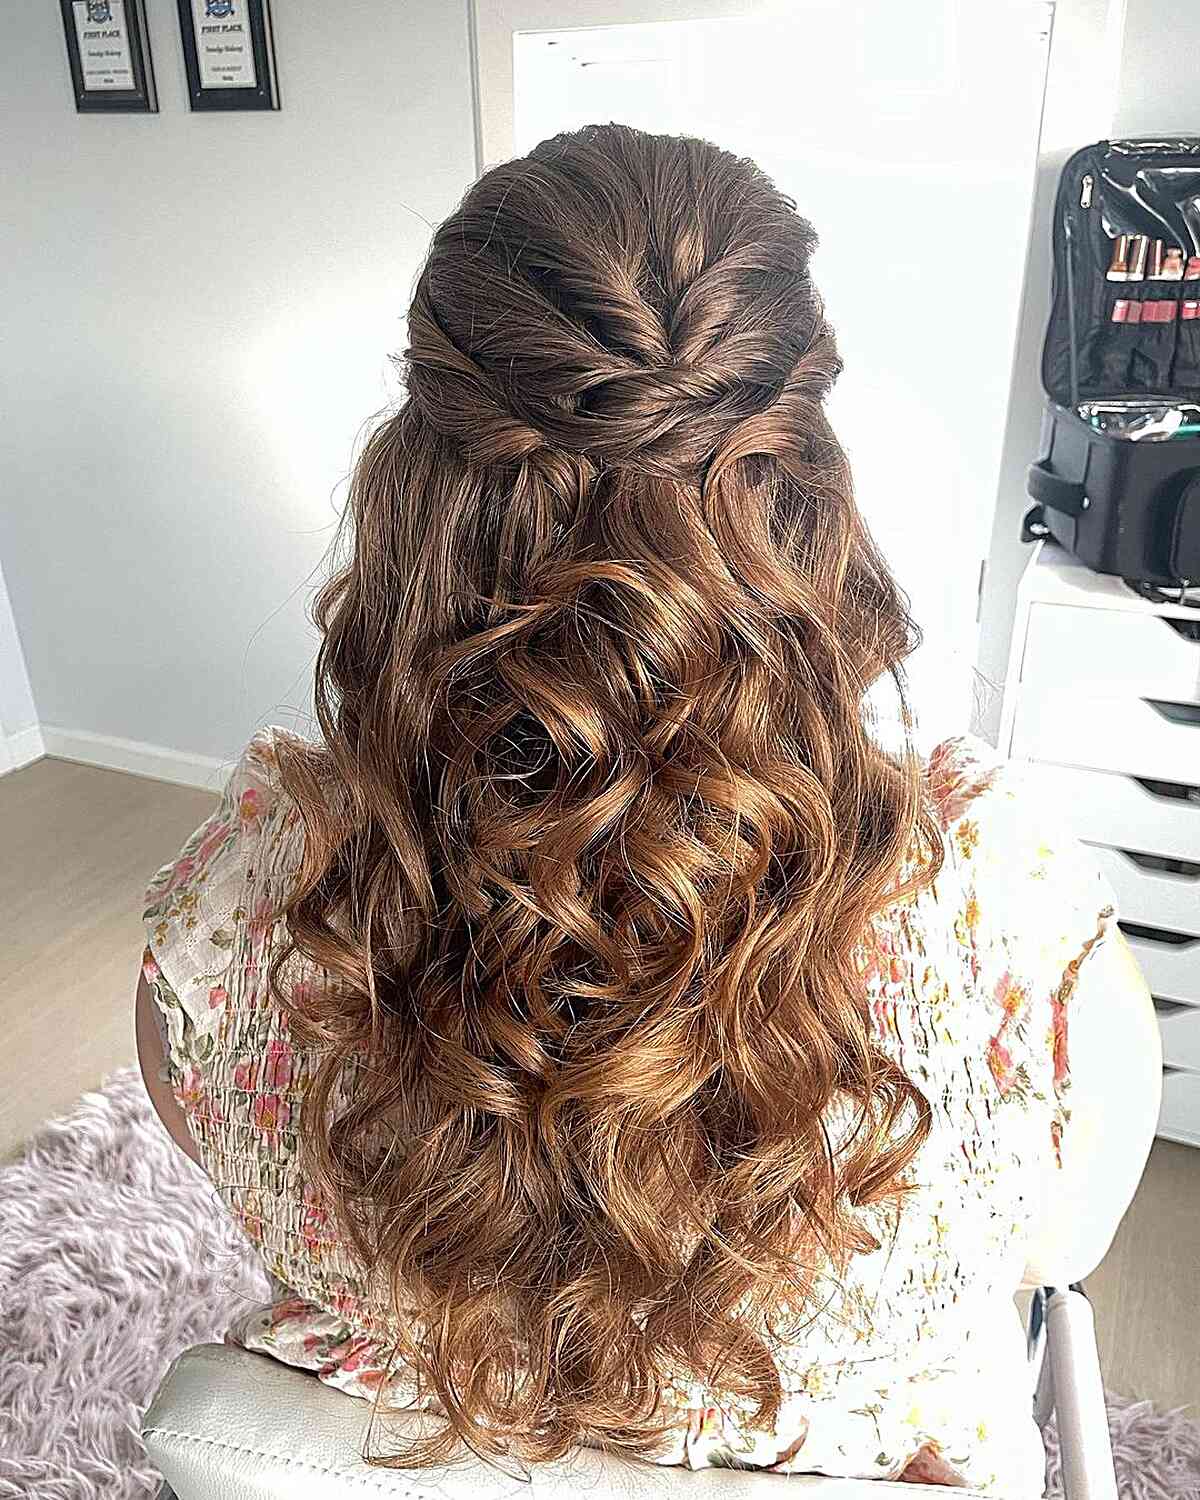 Princess Romantic Twisted Half-Up with Loose Curls for Longer Locks